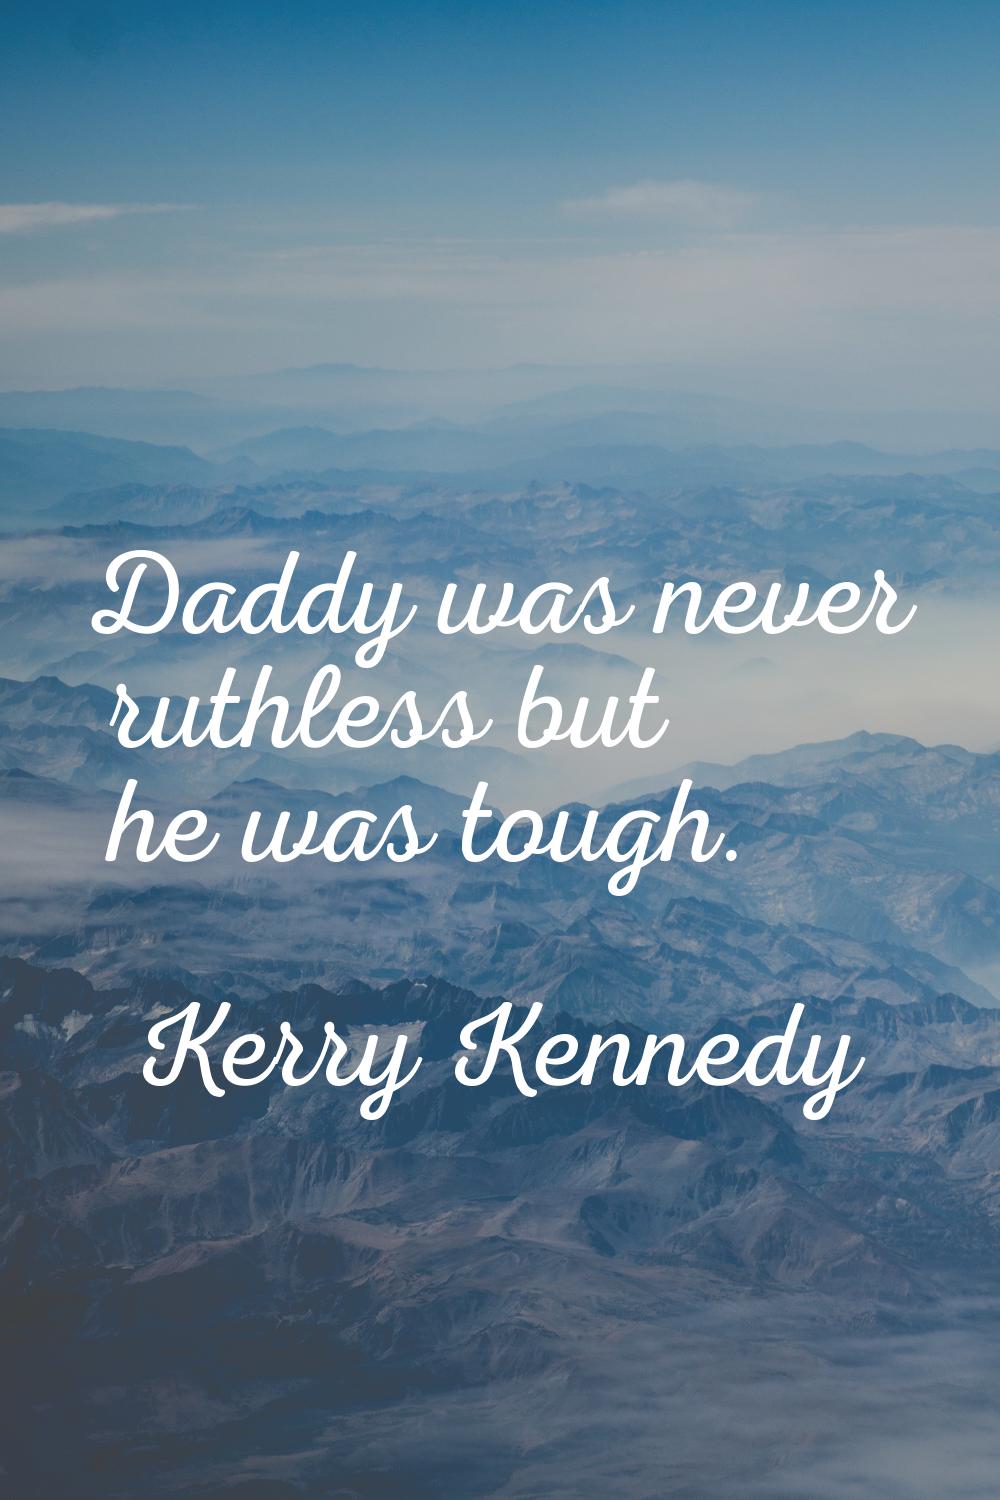 Daddy was never ruthless but he was tough.